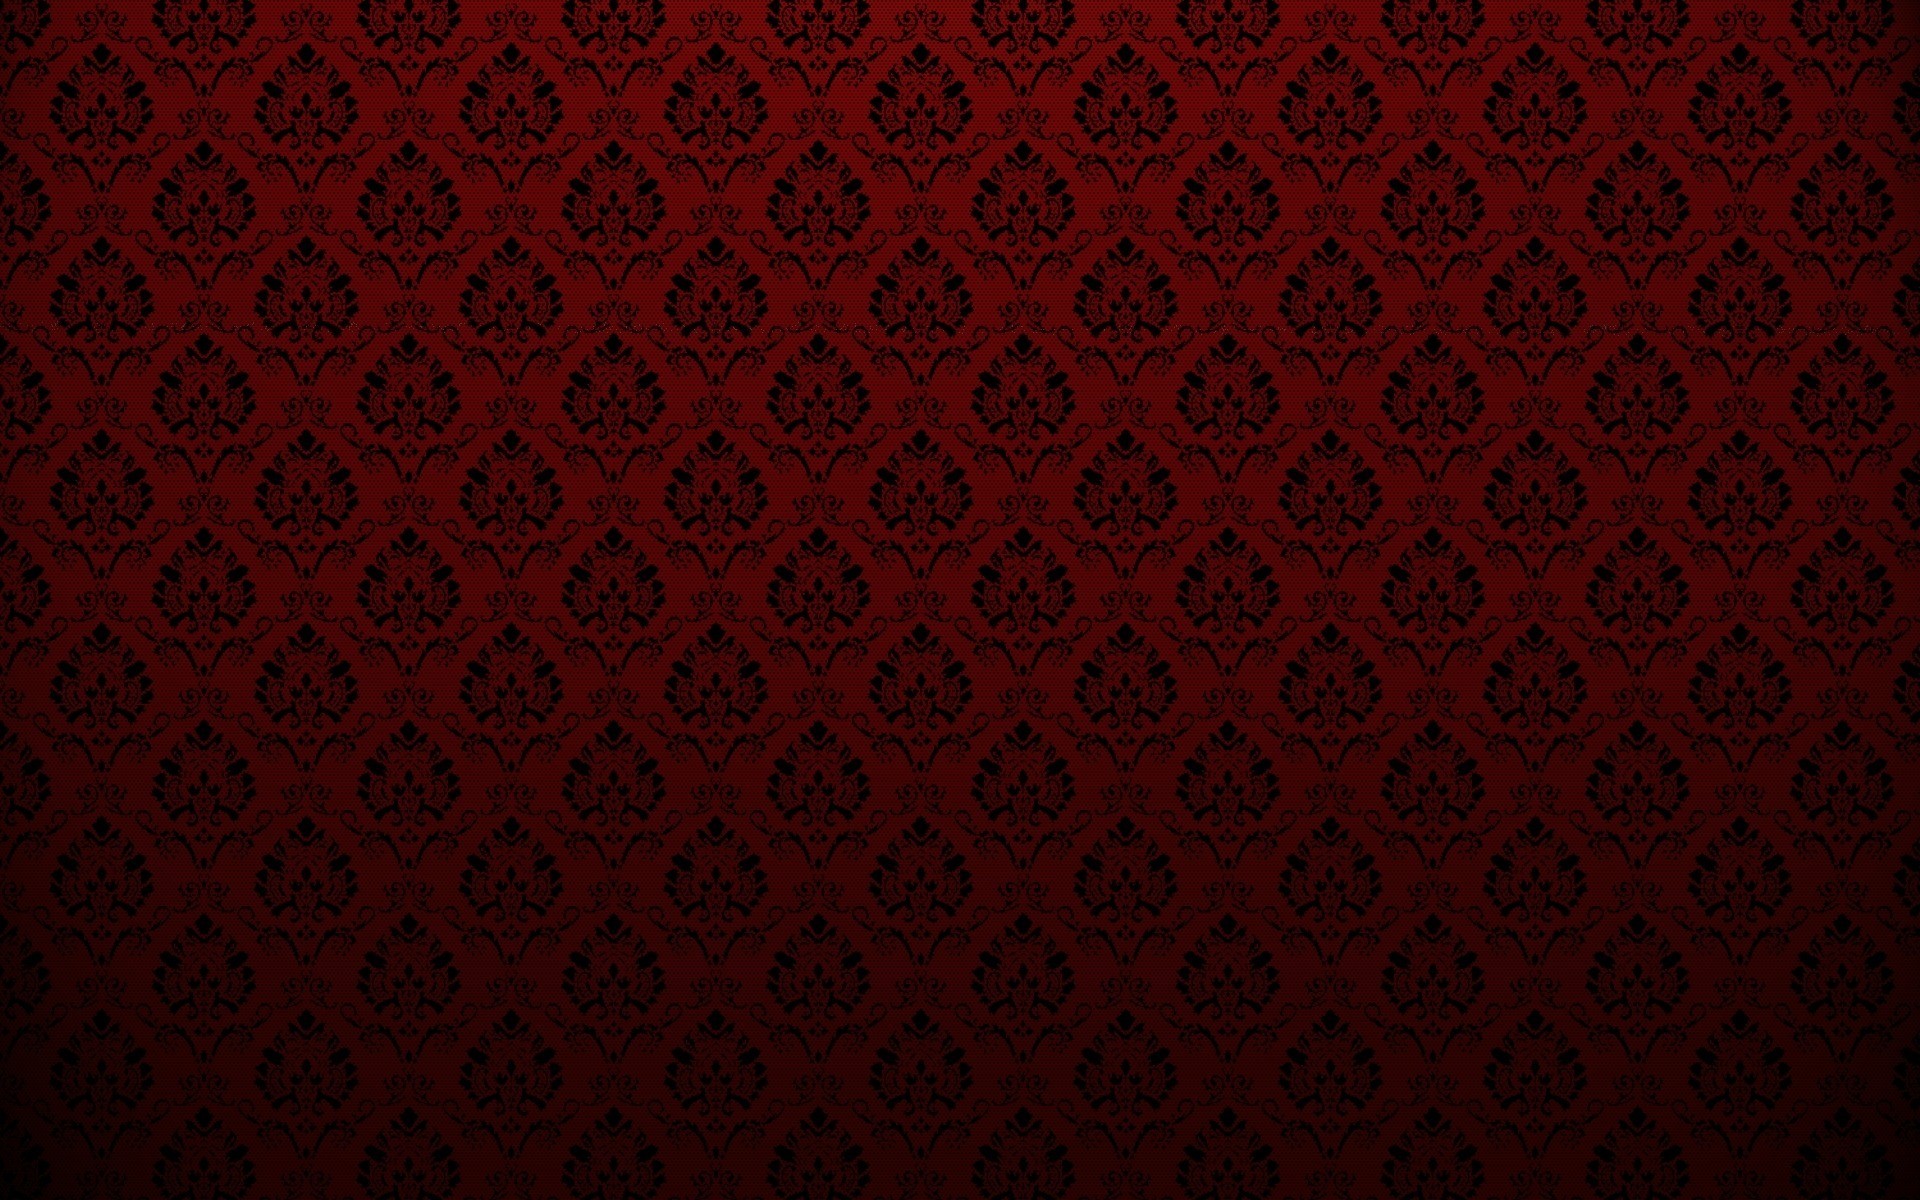 Dark Red HD Wallpapers 12